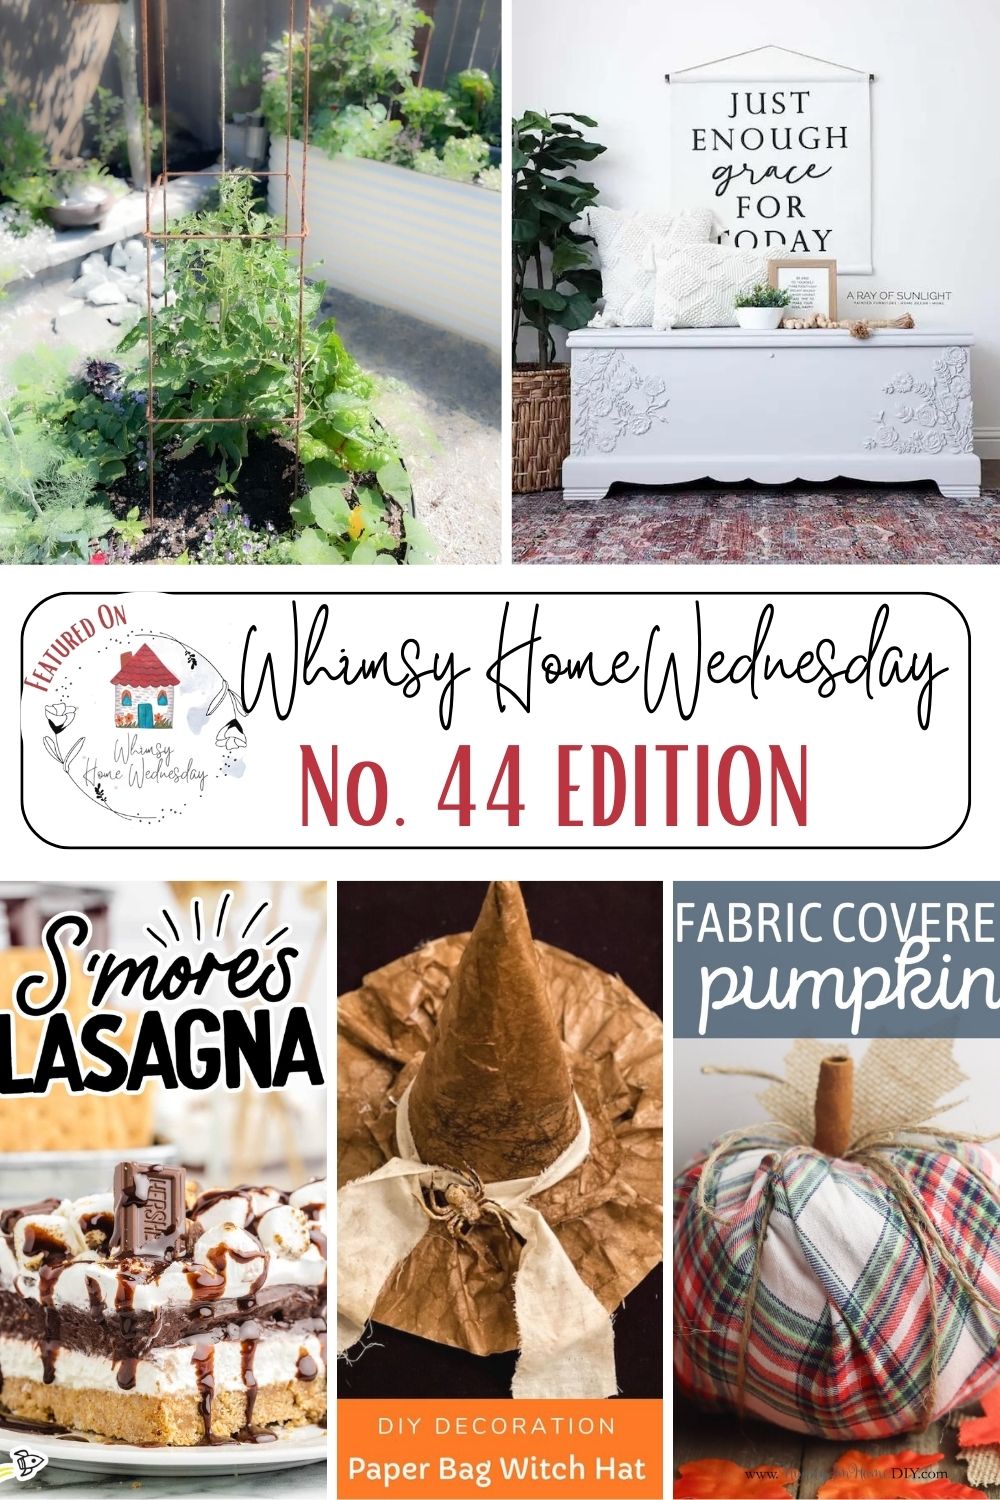 Join us on Whimsy Home Wednesday Blog Link Party No. 44 and see host projects, the features from the previous week and link up your posts!